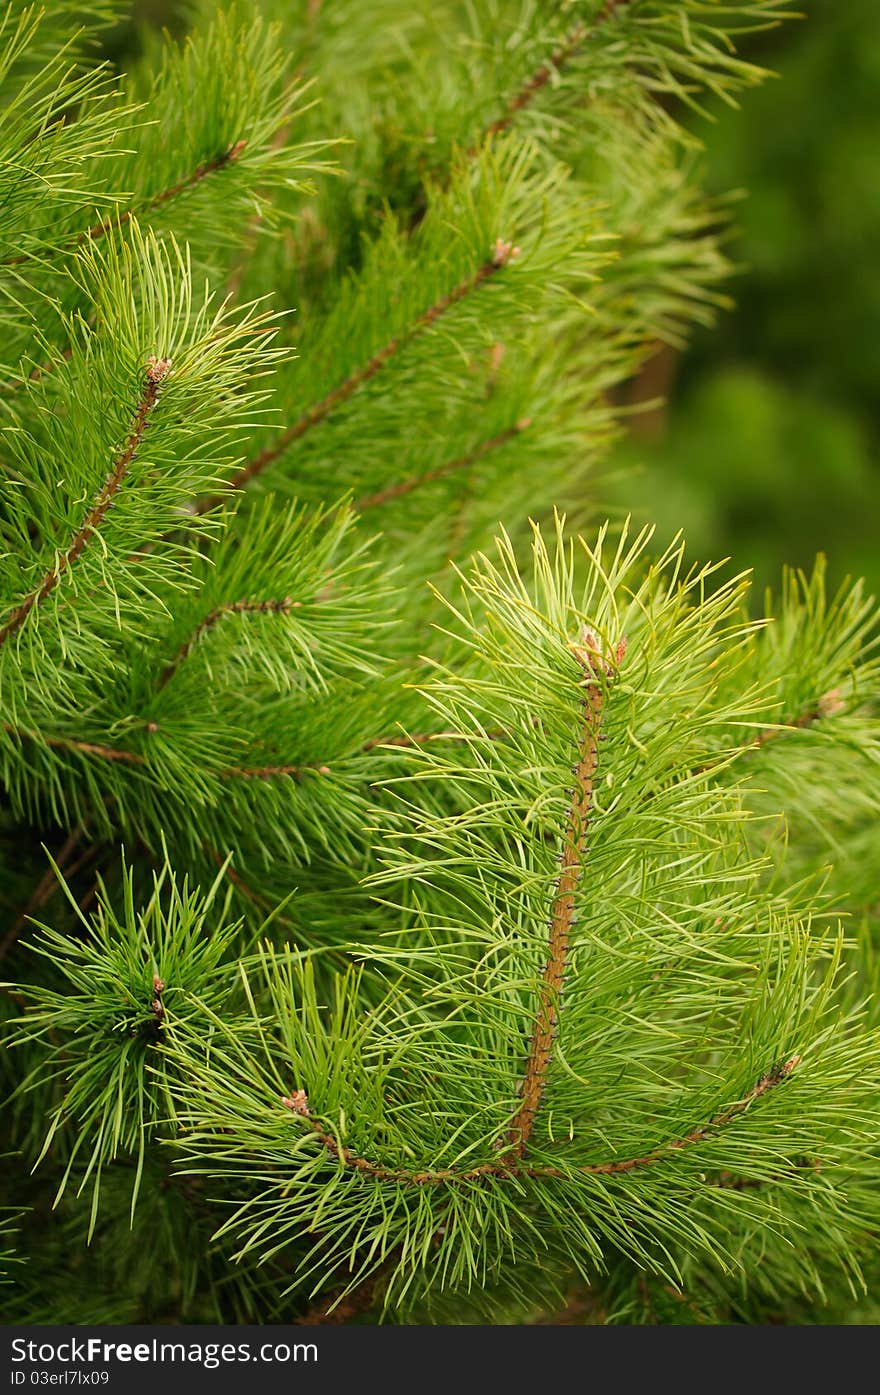 A close-up of young green pine tree branches. A close-up of young green pine tree branches